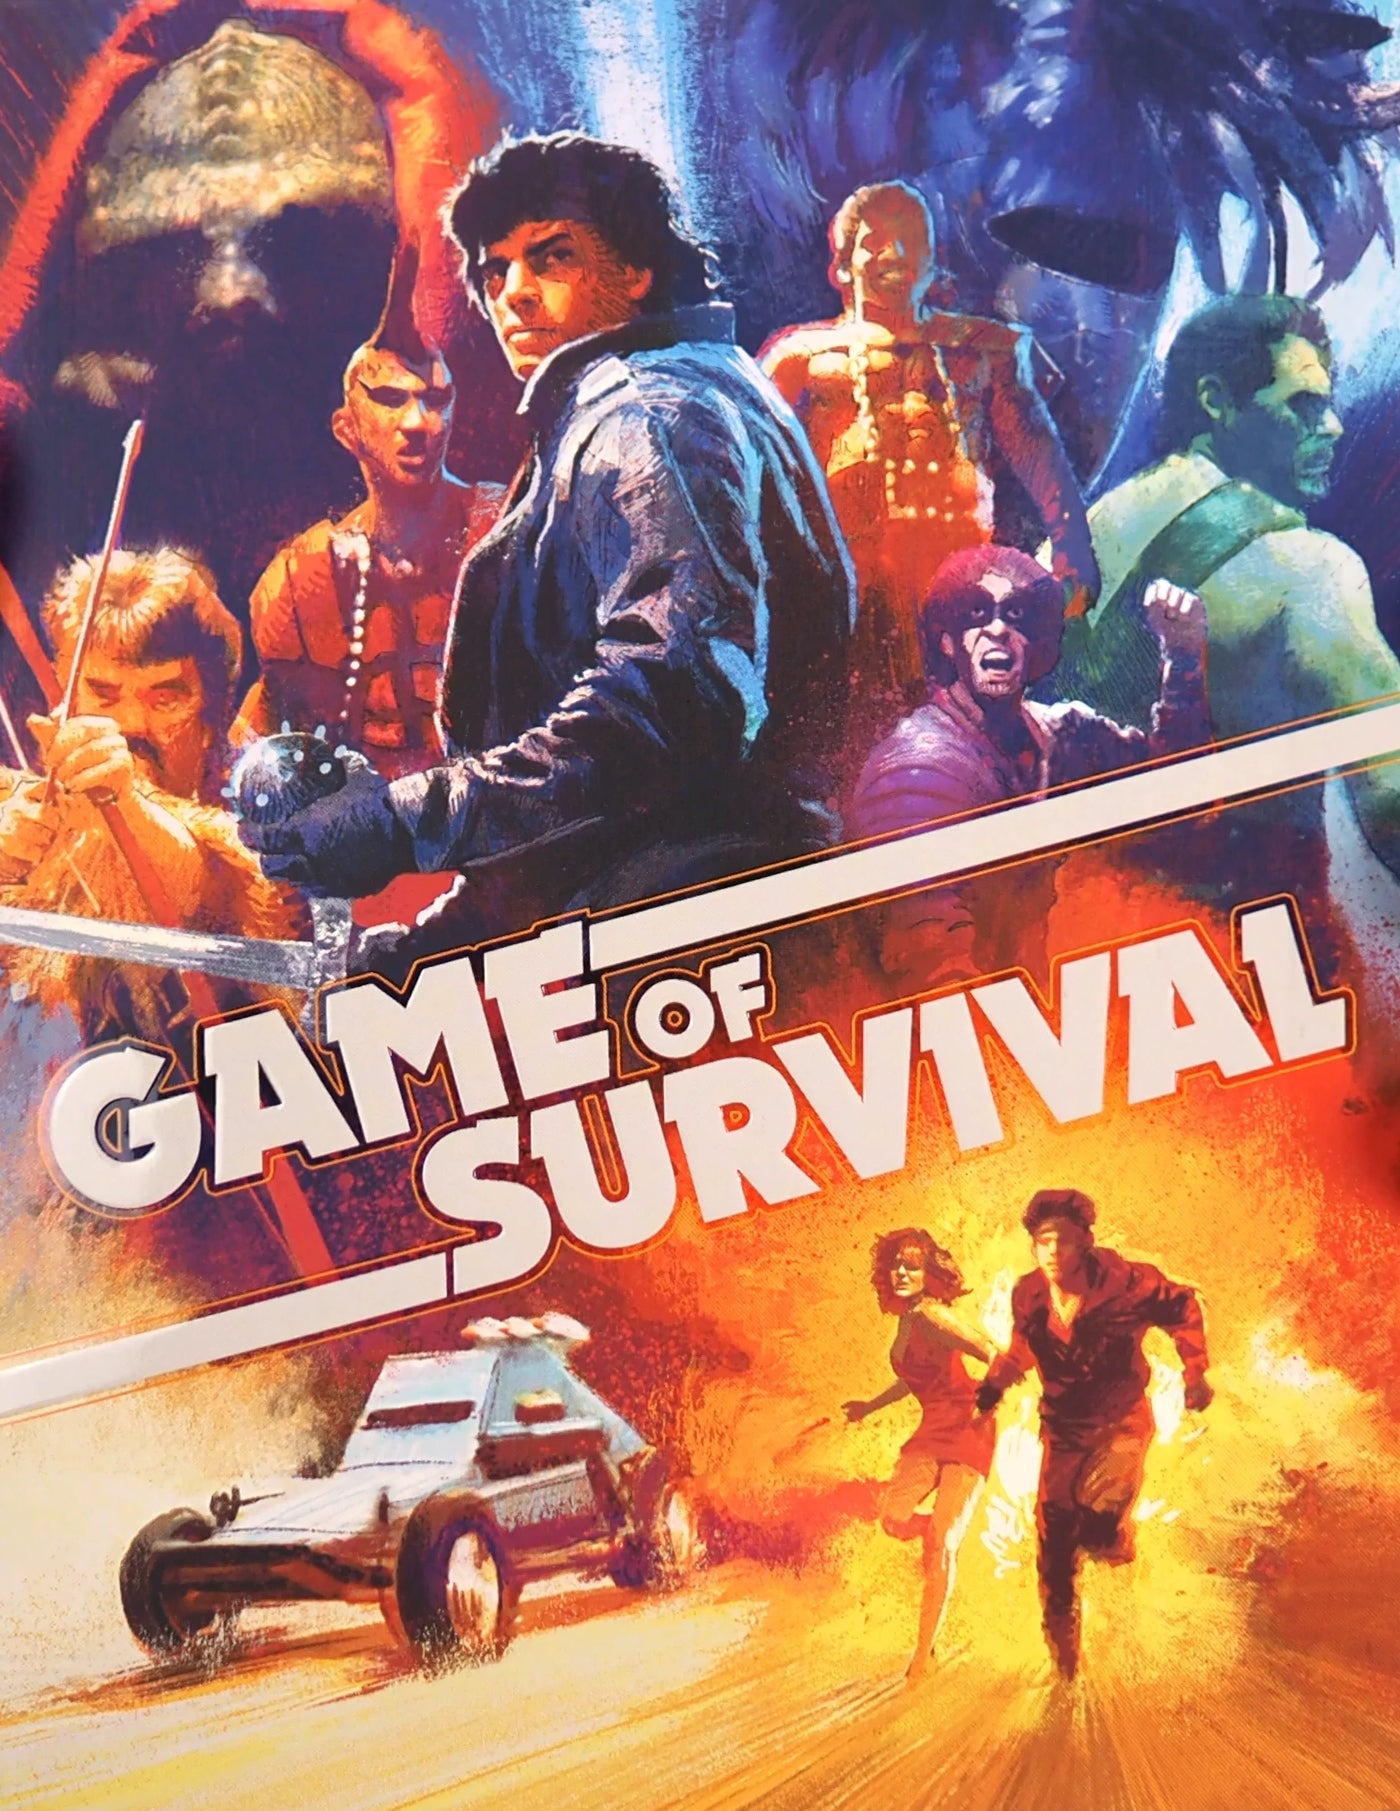 GAME OF SURVIVAL (LIMITED EDITION) BLU-RAY